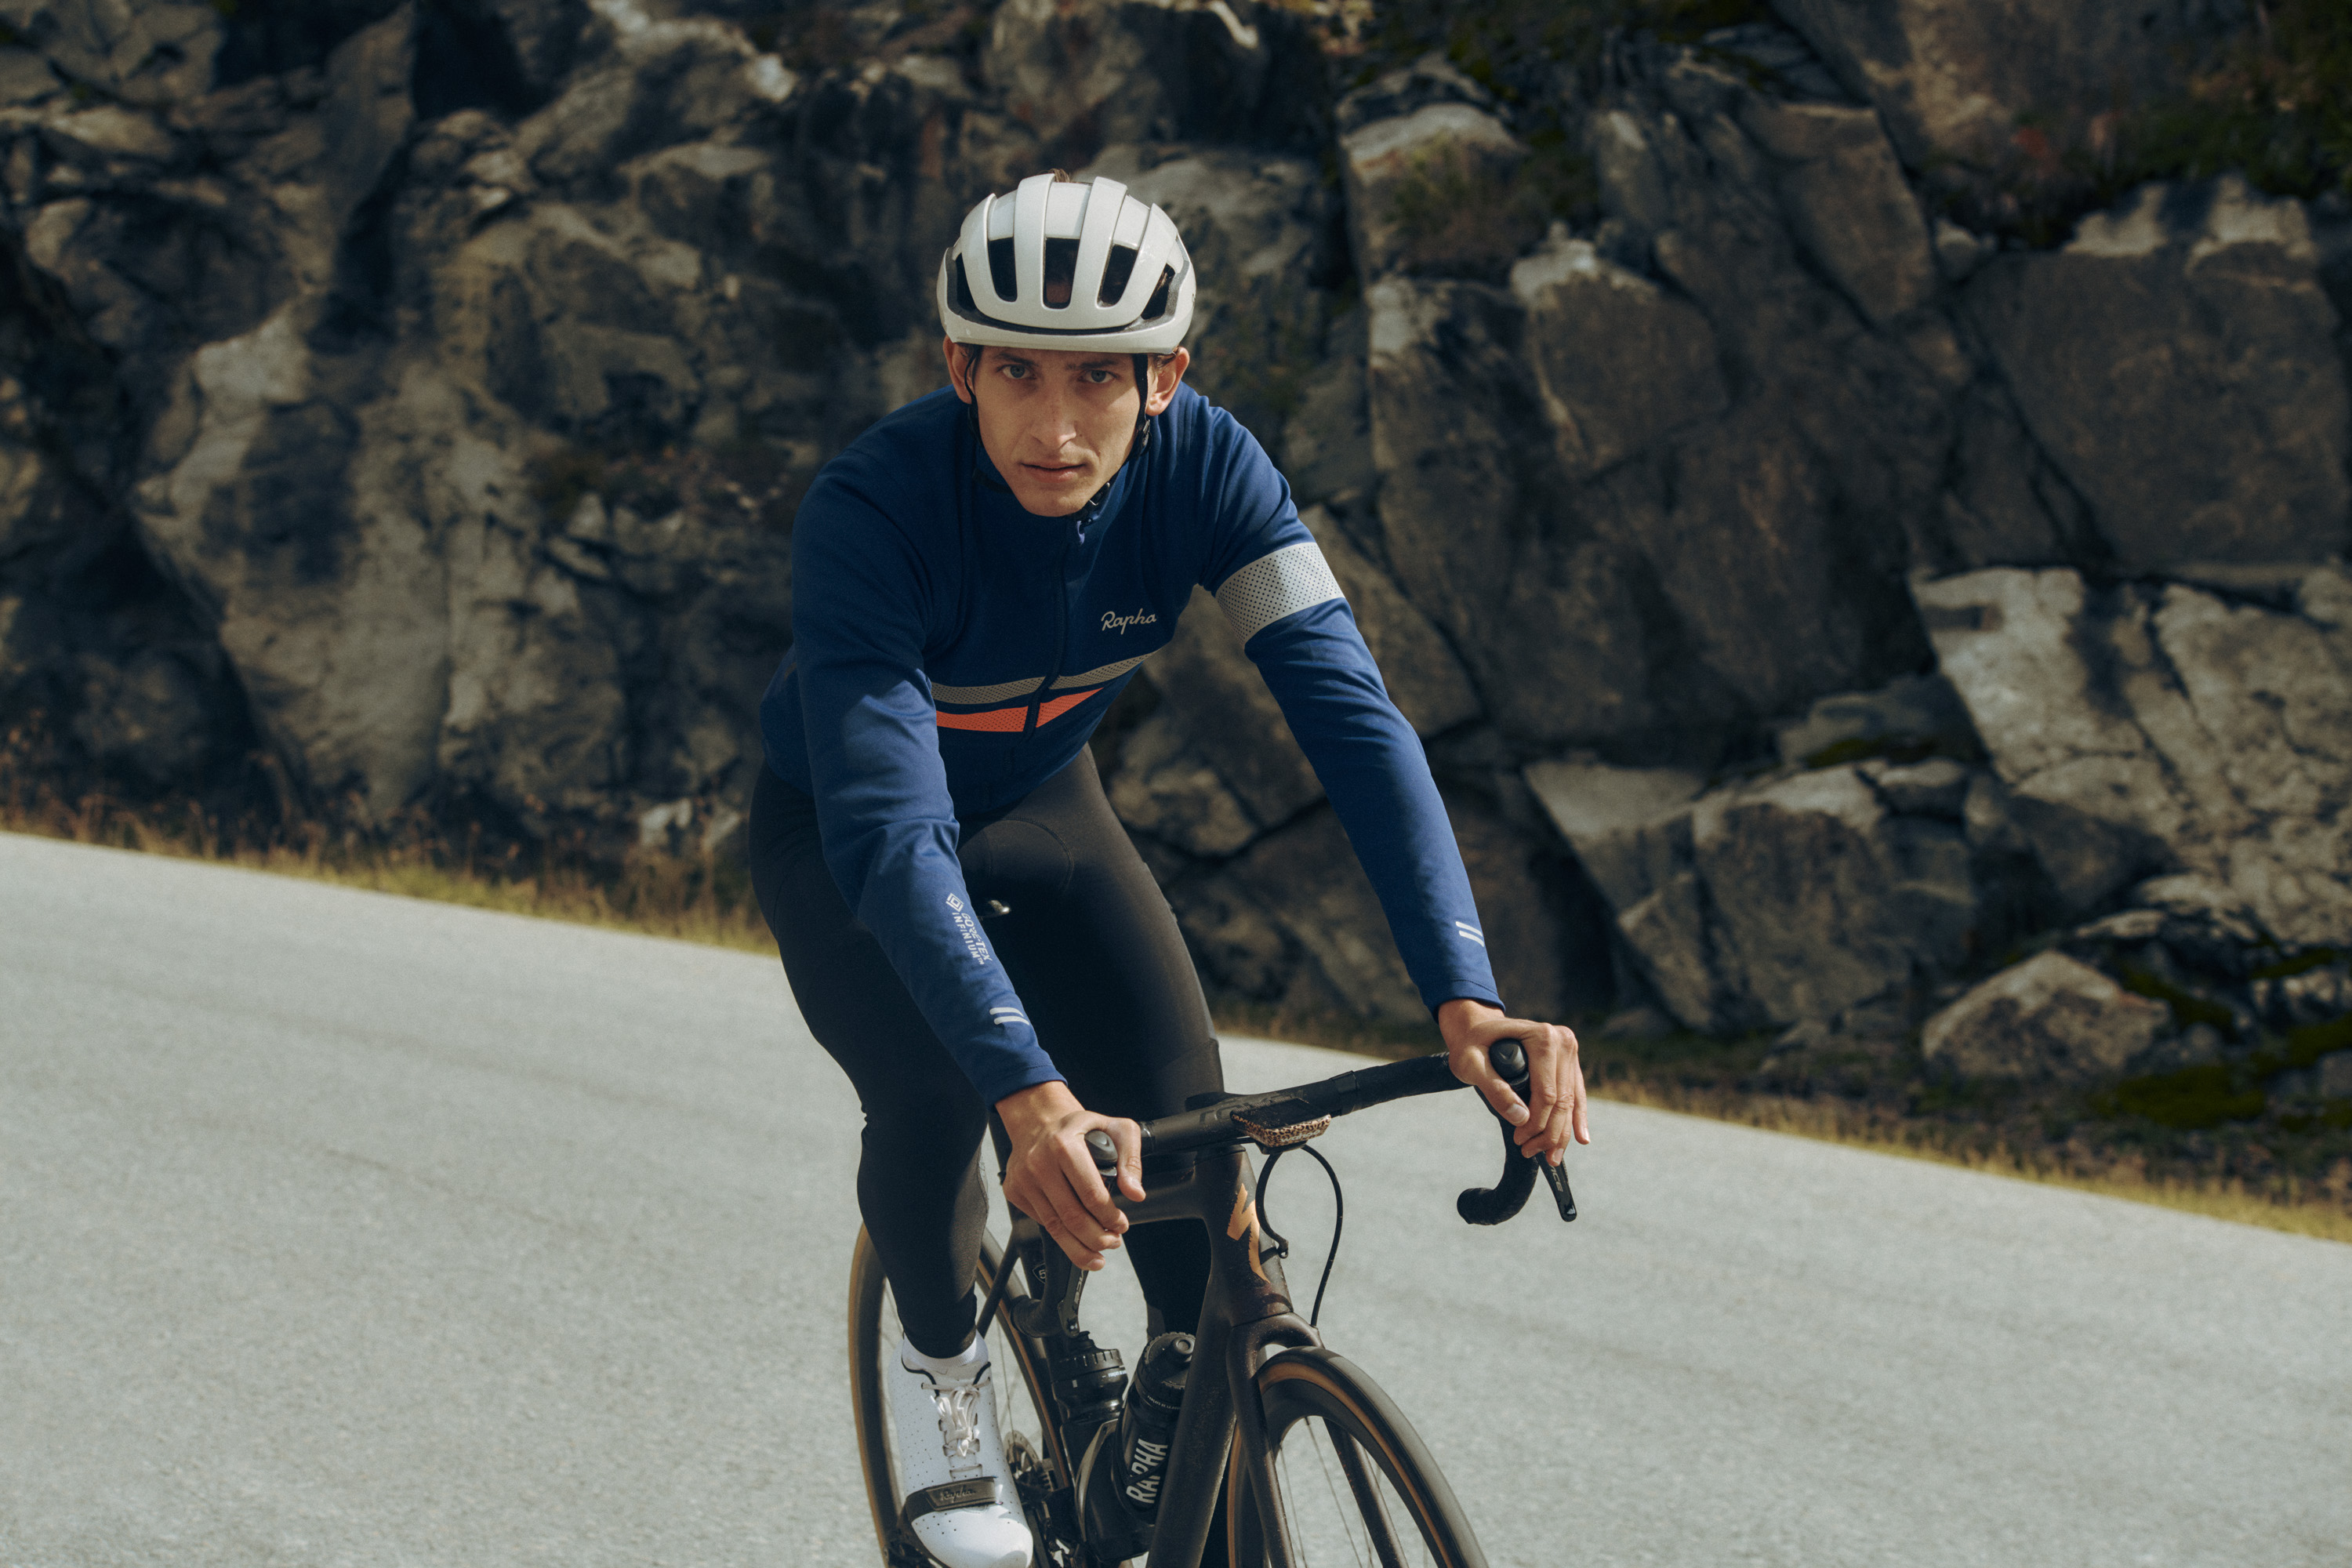 Rapha: The warmth in winter